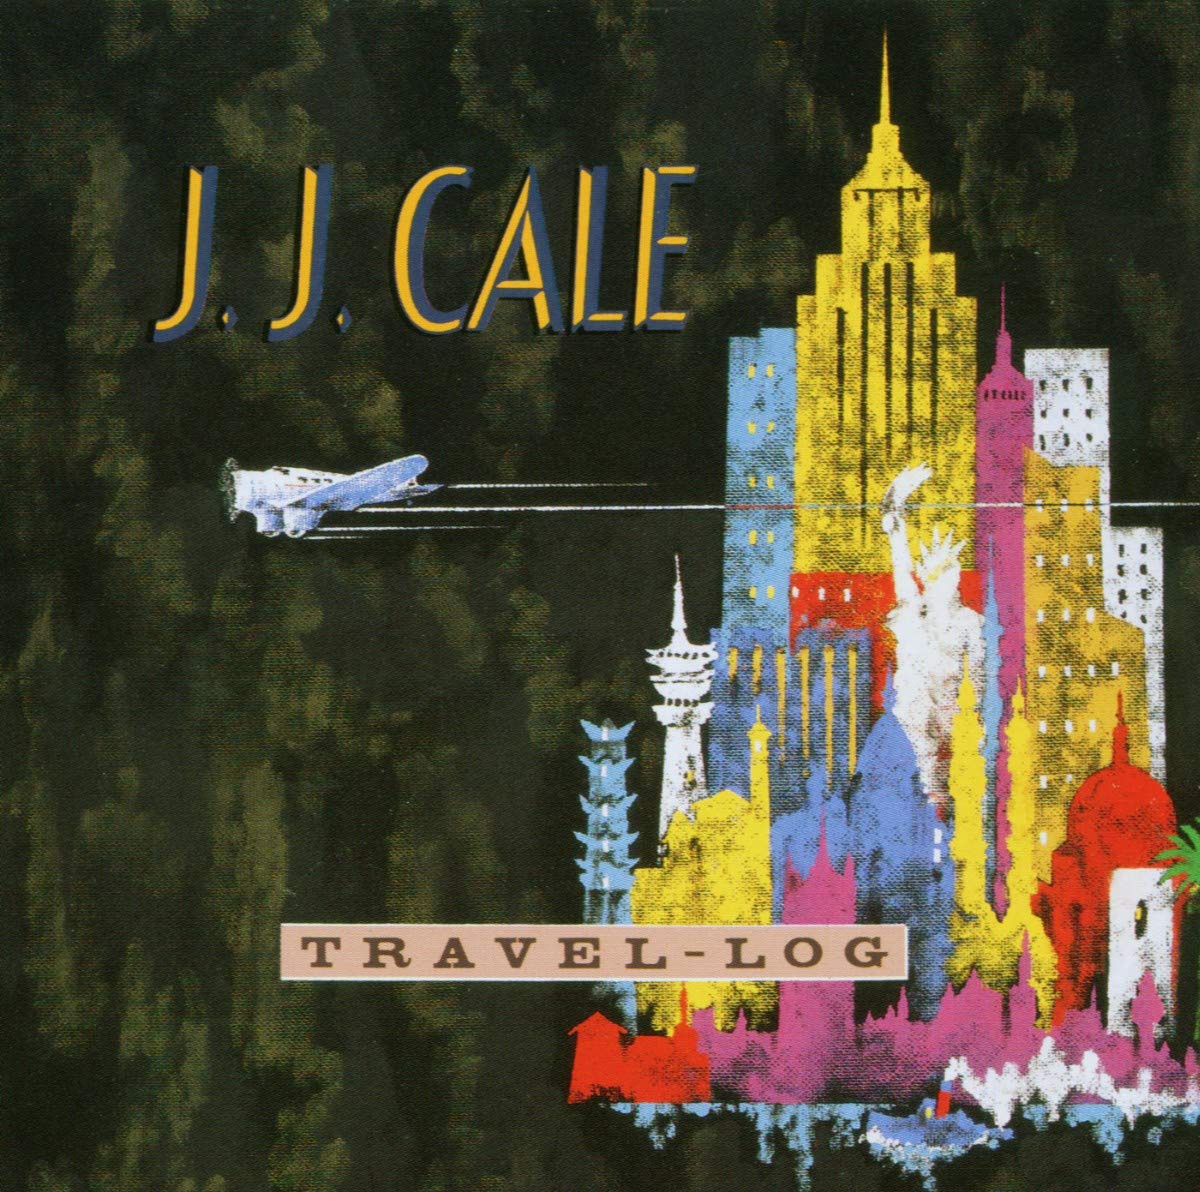 J.J. Cale – Travel-Log (2020 Limited Edition, Mimosa Marble Vinyl)